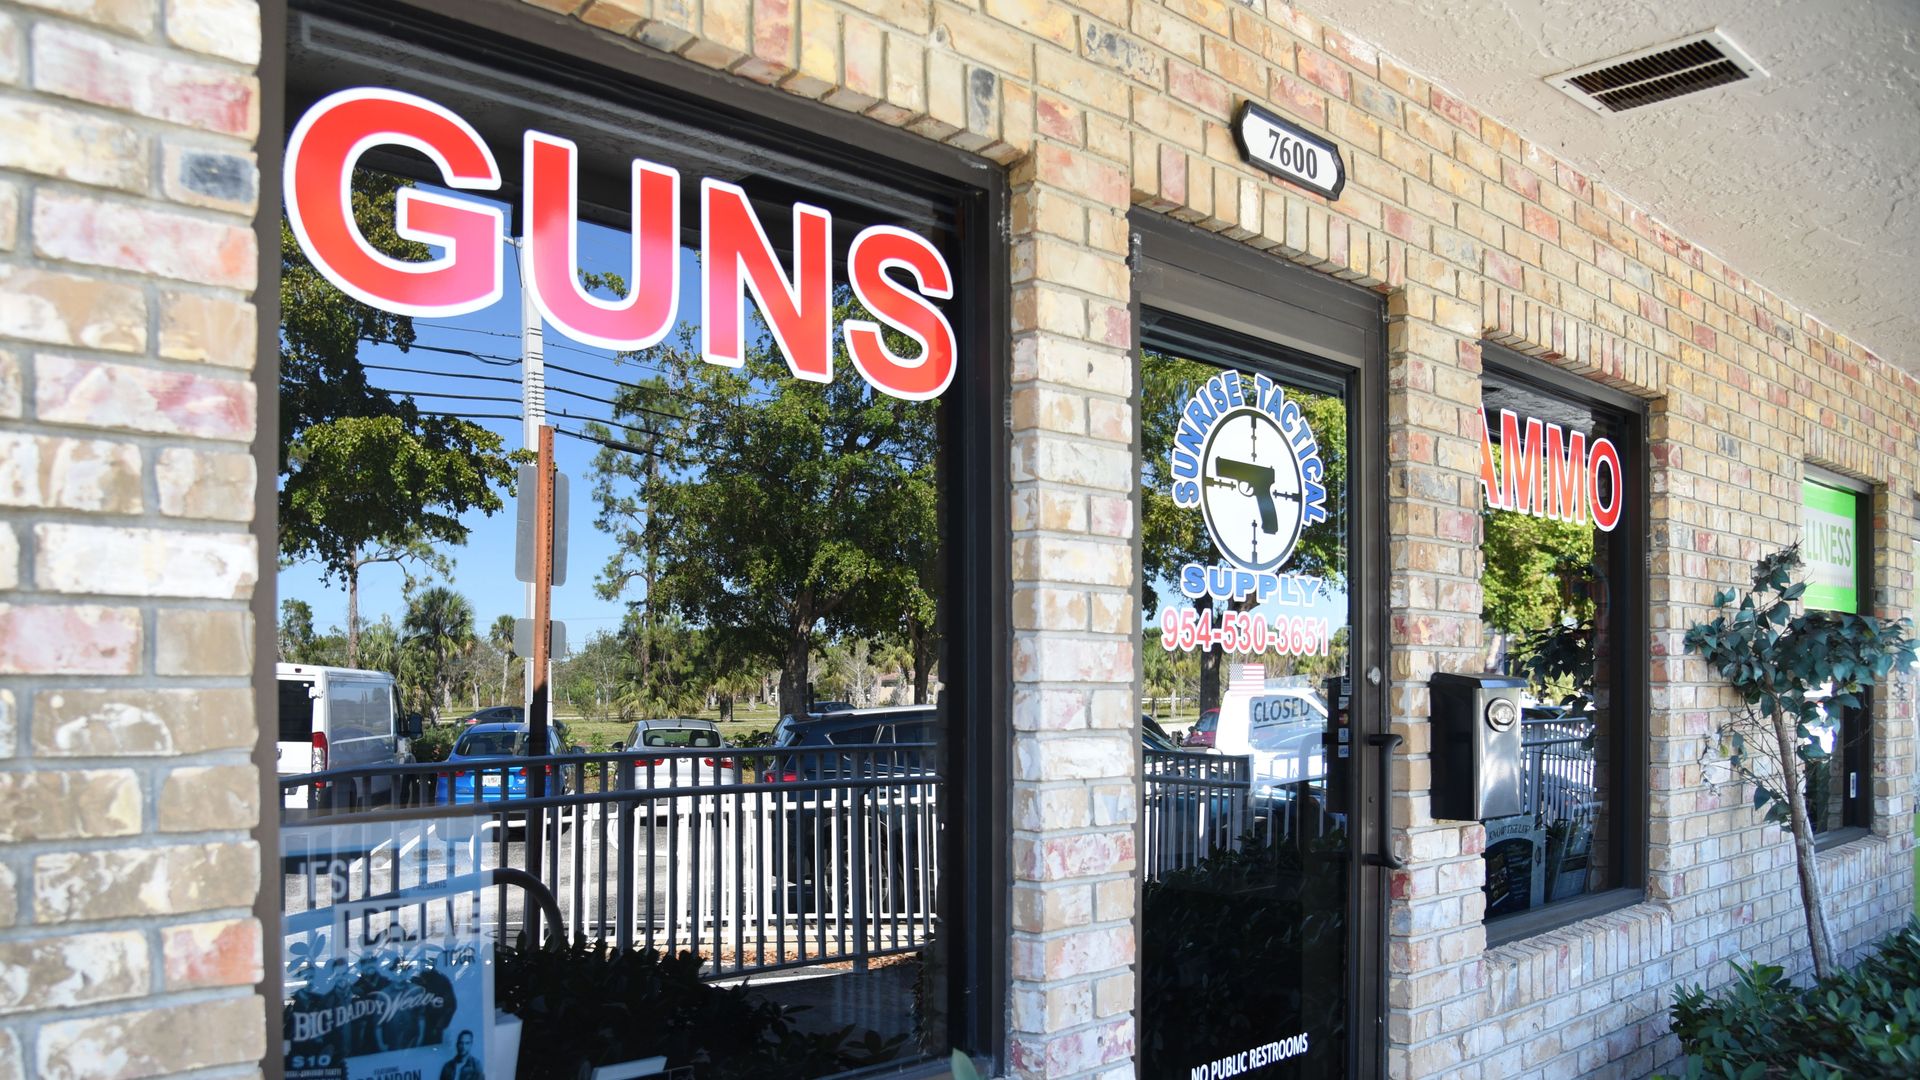 Outside view of Sunrise Tactical Supply store in Coral Springs, Florida on February 16, 2018 where school shooter Nikolas Cruz bought his AR-15 to gun down students at Marjory Stoneman High School.